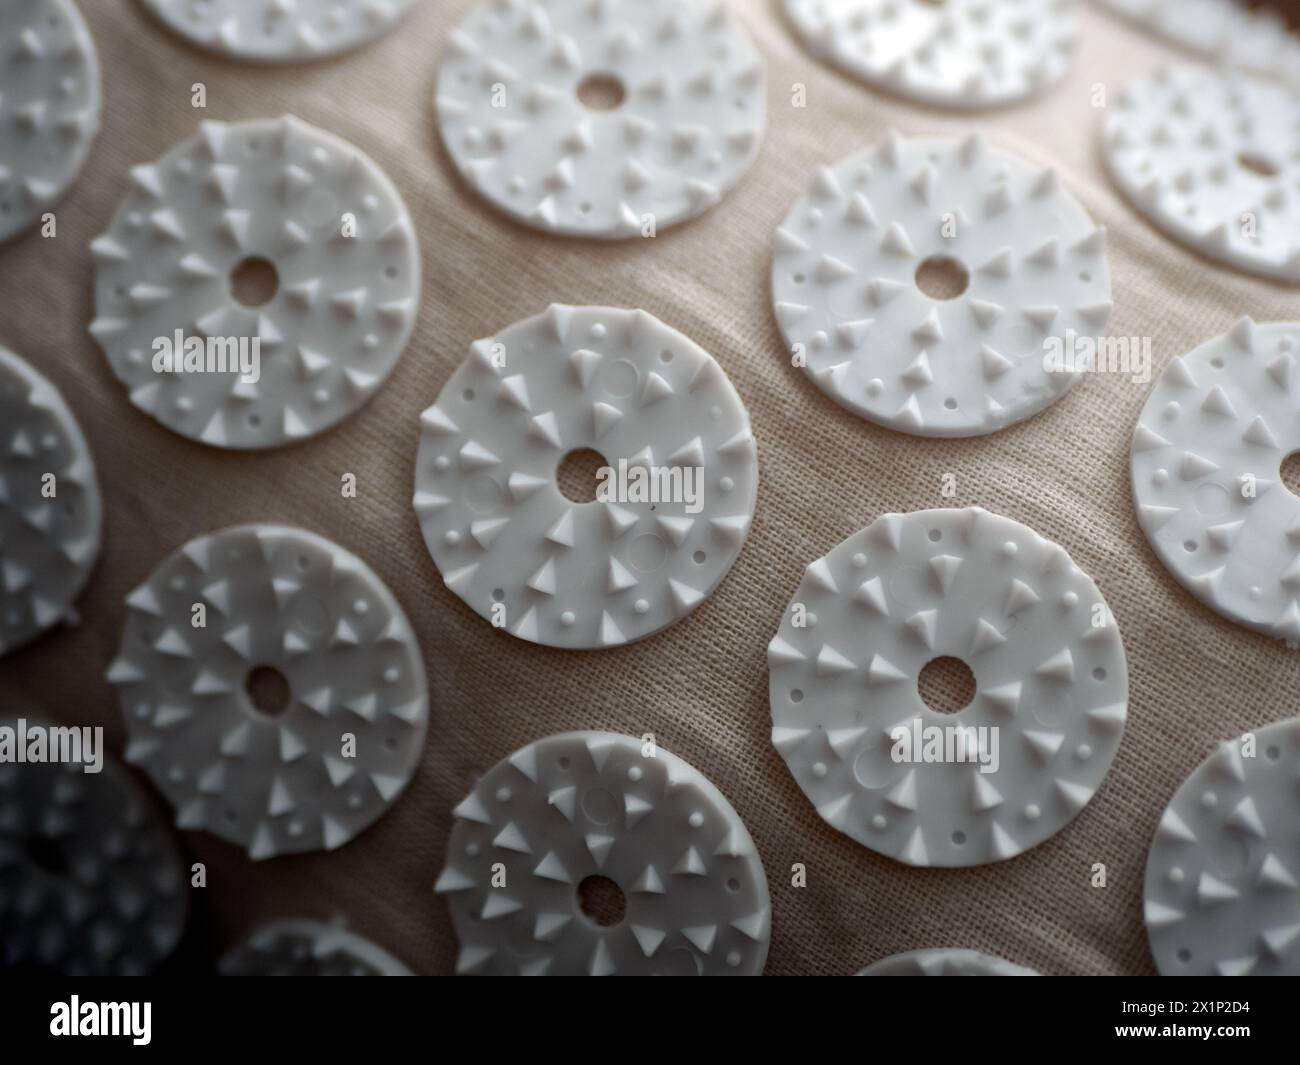 Special device with spikes that applied to the painful area, close up. Concept of alternative medicine, acupressure, relaxation Stock Photo